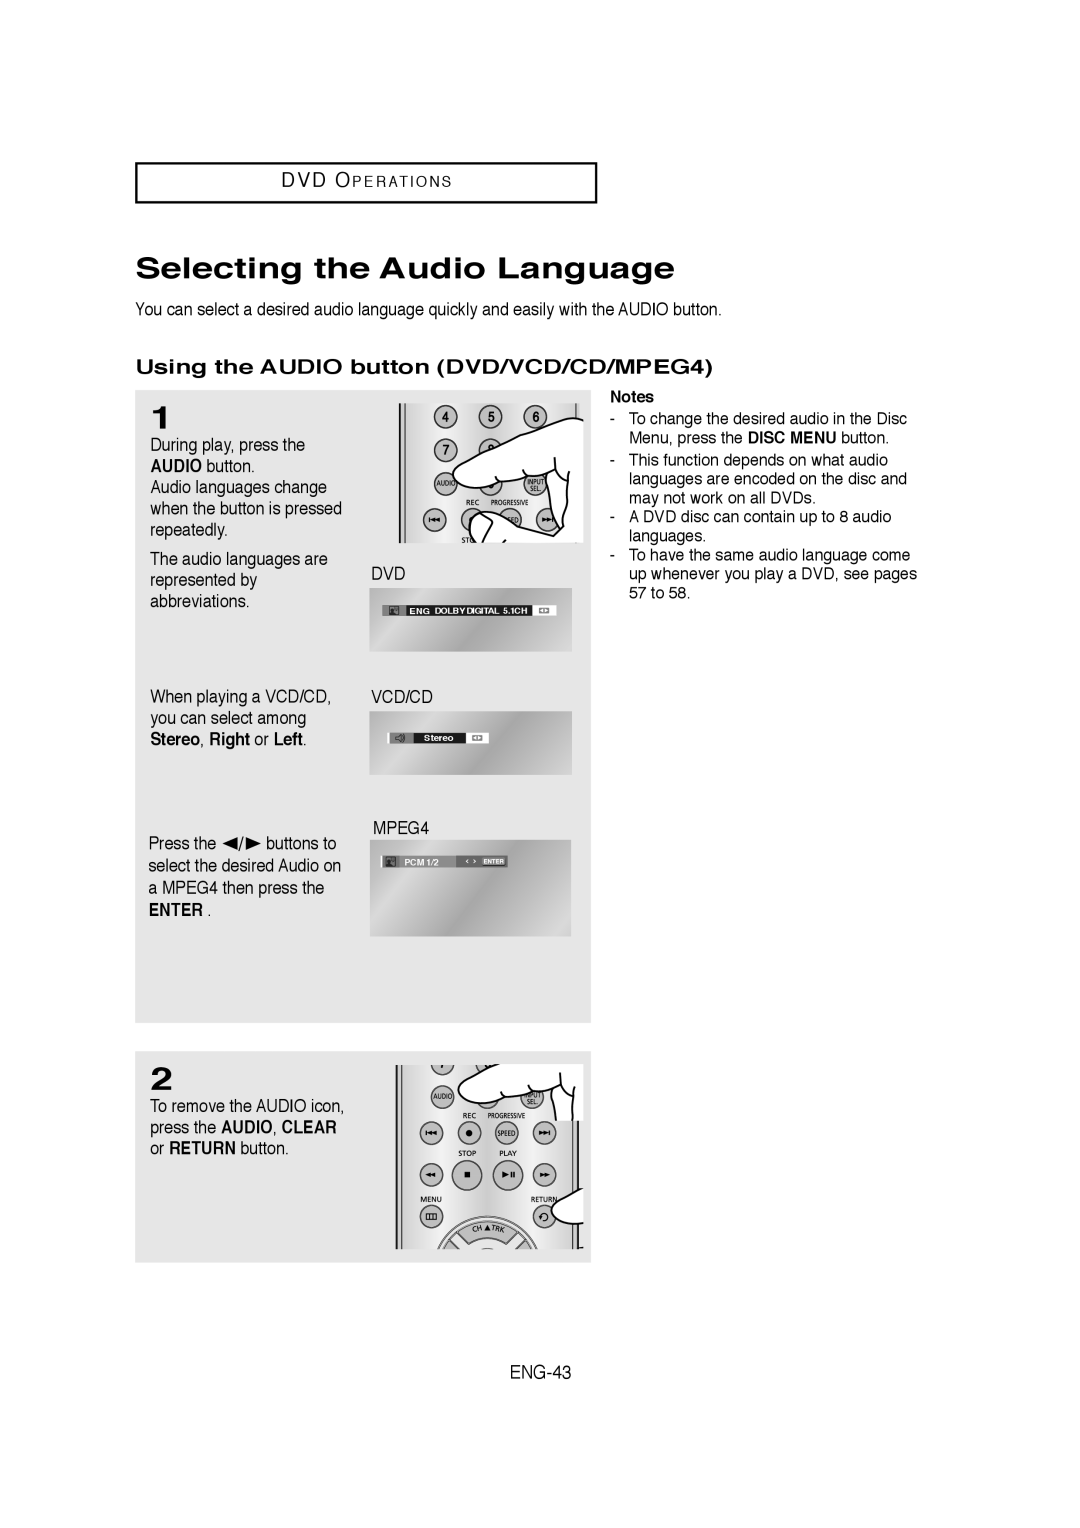 Samsung 20070205090323359, V6700-XAC, 01304A Selecting the Audio Language, Using the AUDIO button DVD/VCD/CD/MPEG4, Enter 